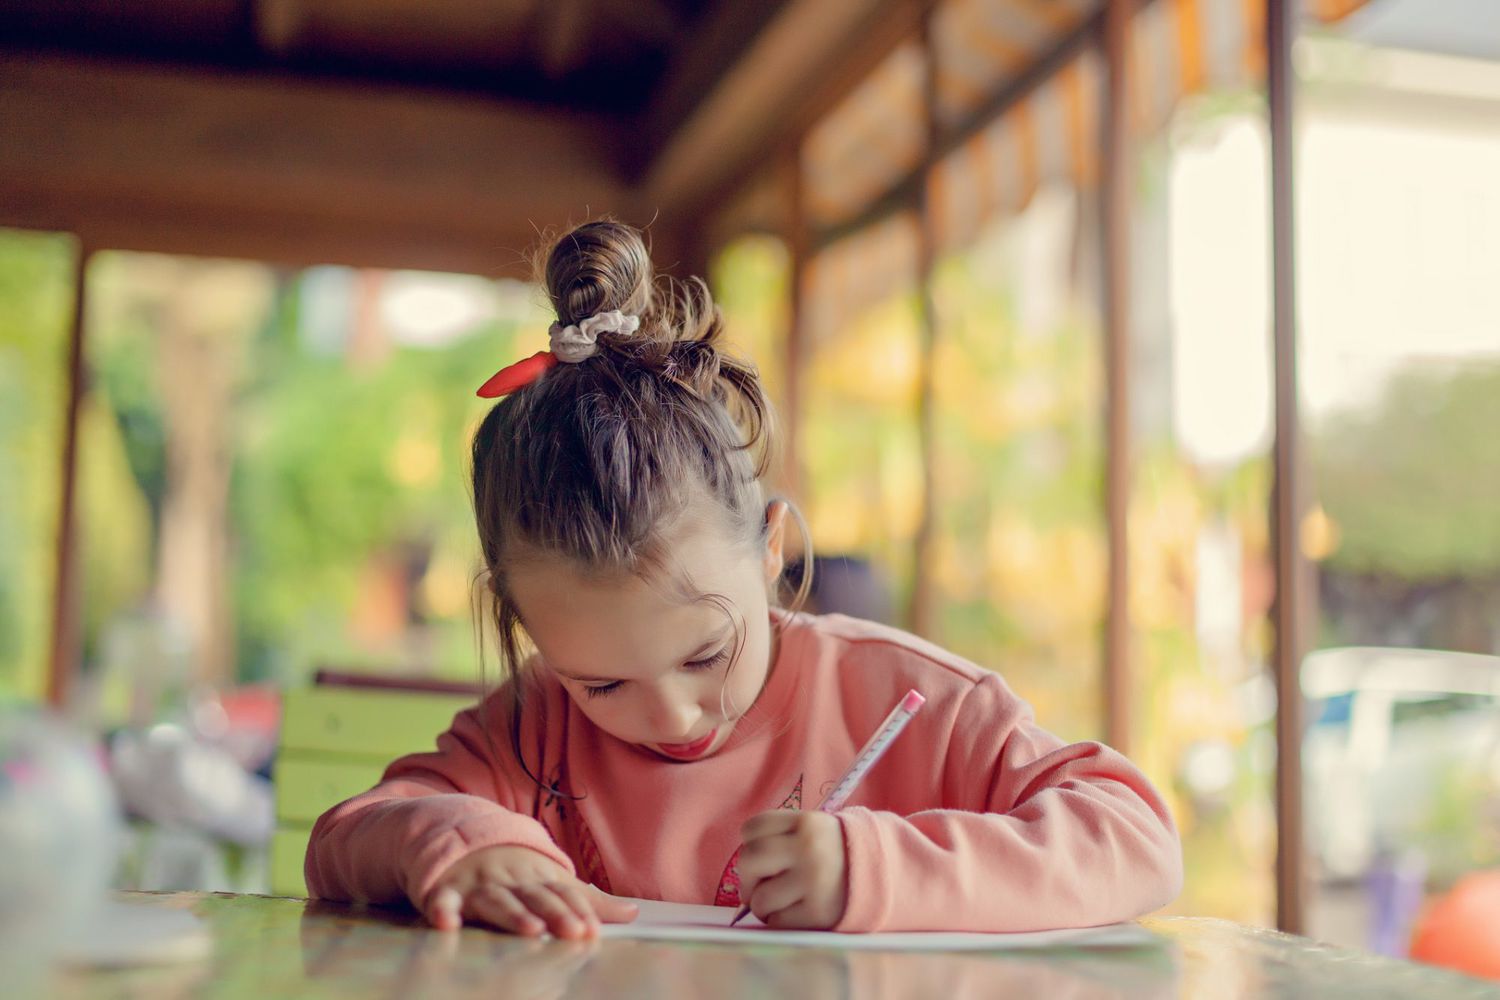 An image of a little girl writing.